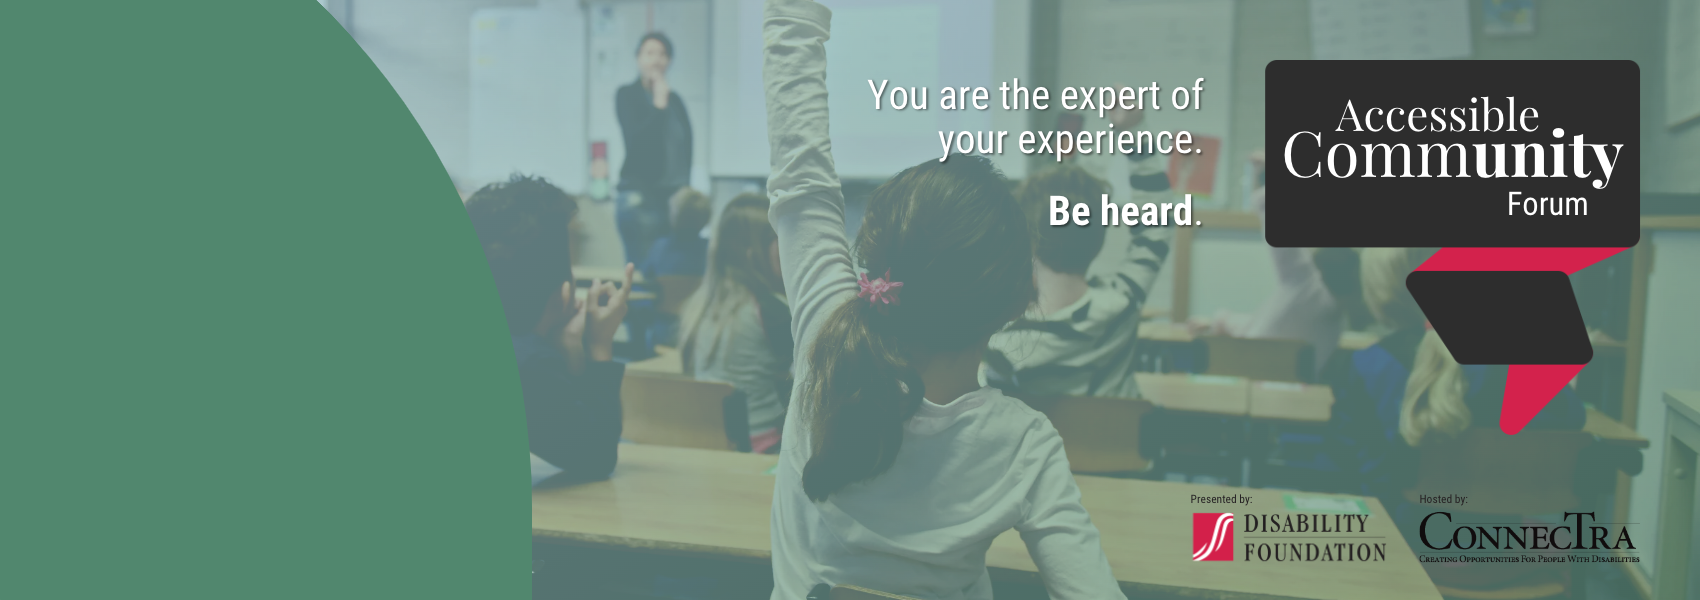 Children in class raising their hands. You are the expert of your own experience. Be heard. Accessible Community Forum.